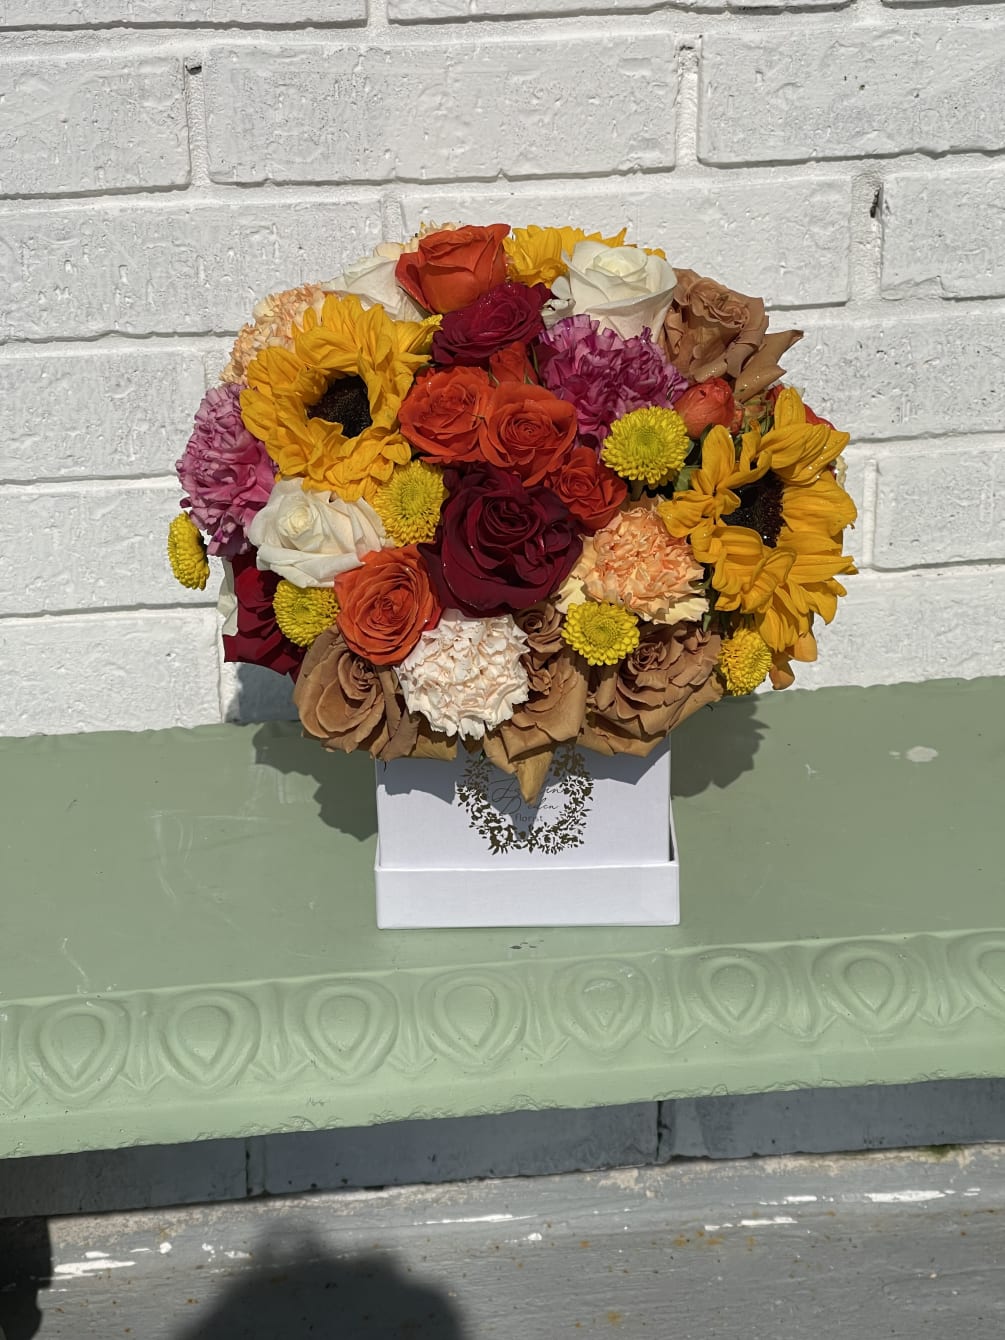 a beautiful box filled with roses, sunflowers, carnations and a variety of